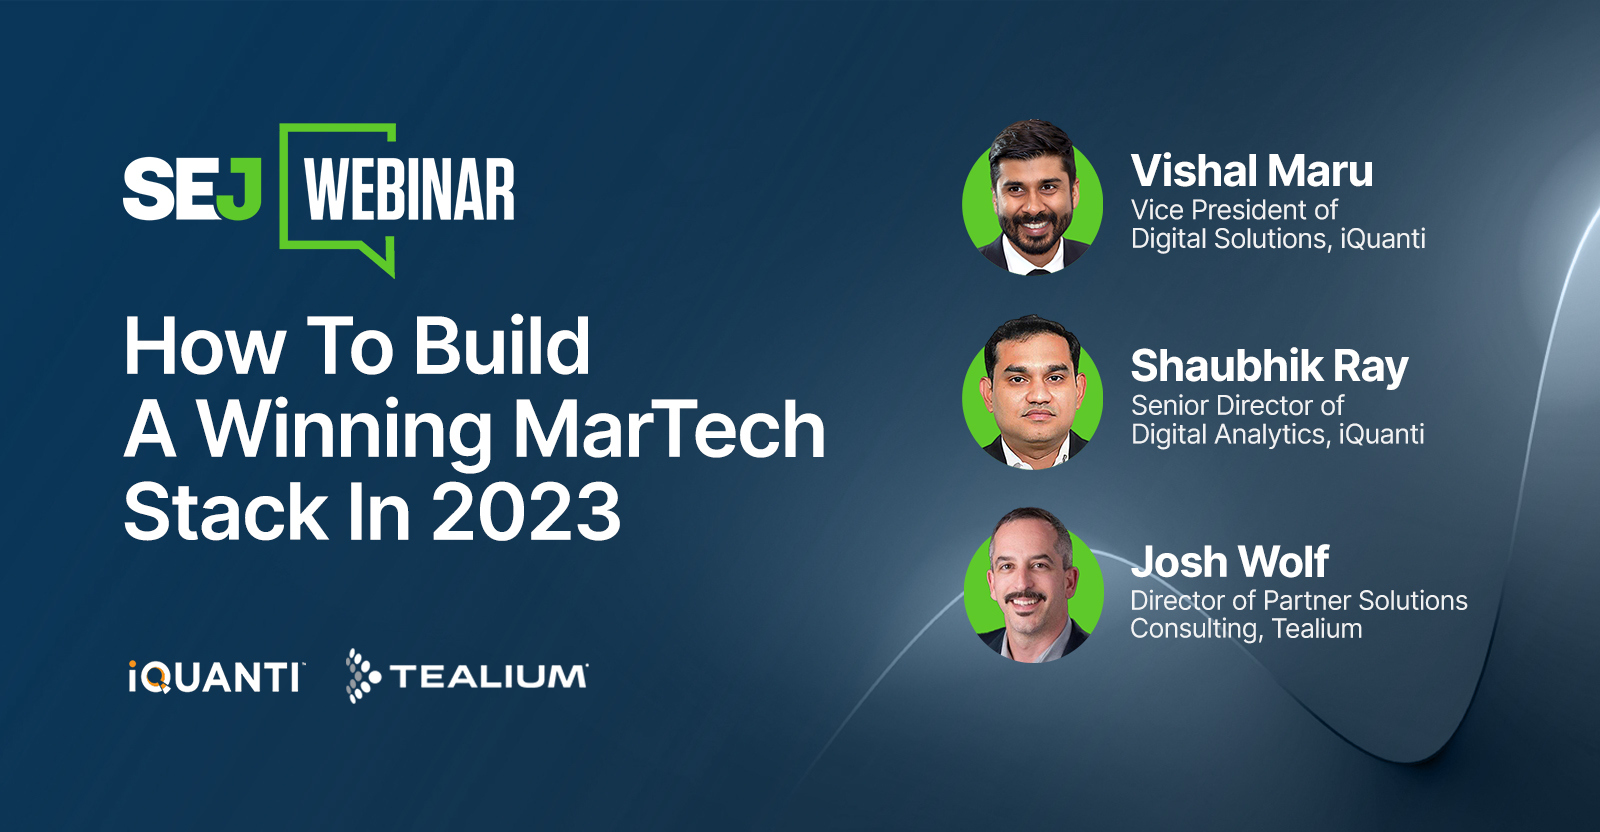 How To Build A Winning MarTech Stack In 2023